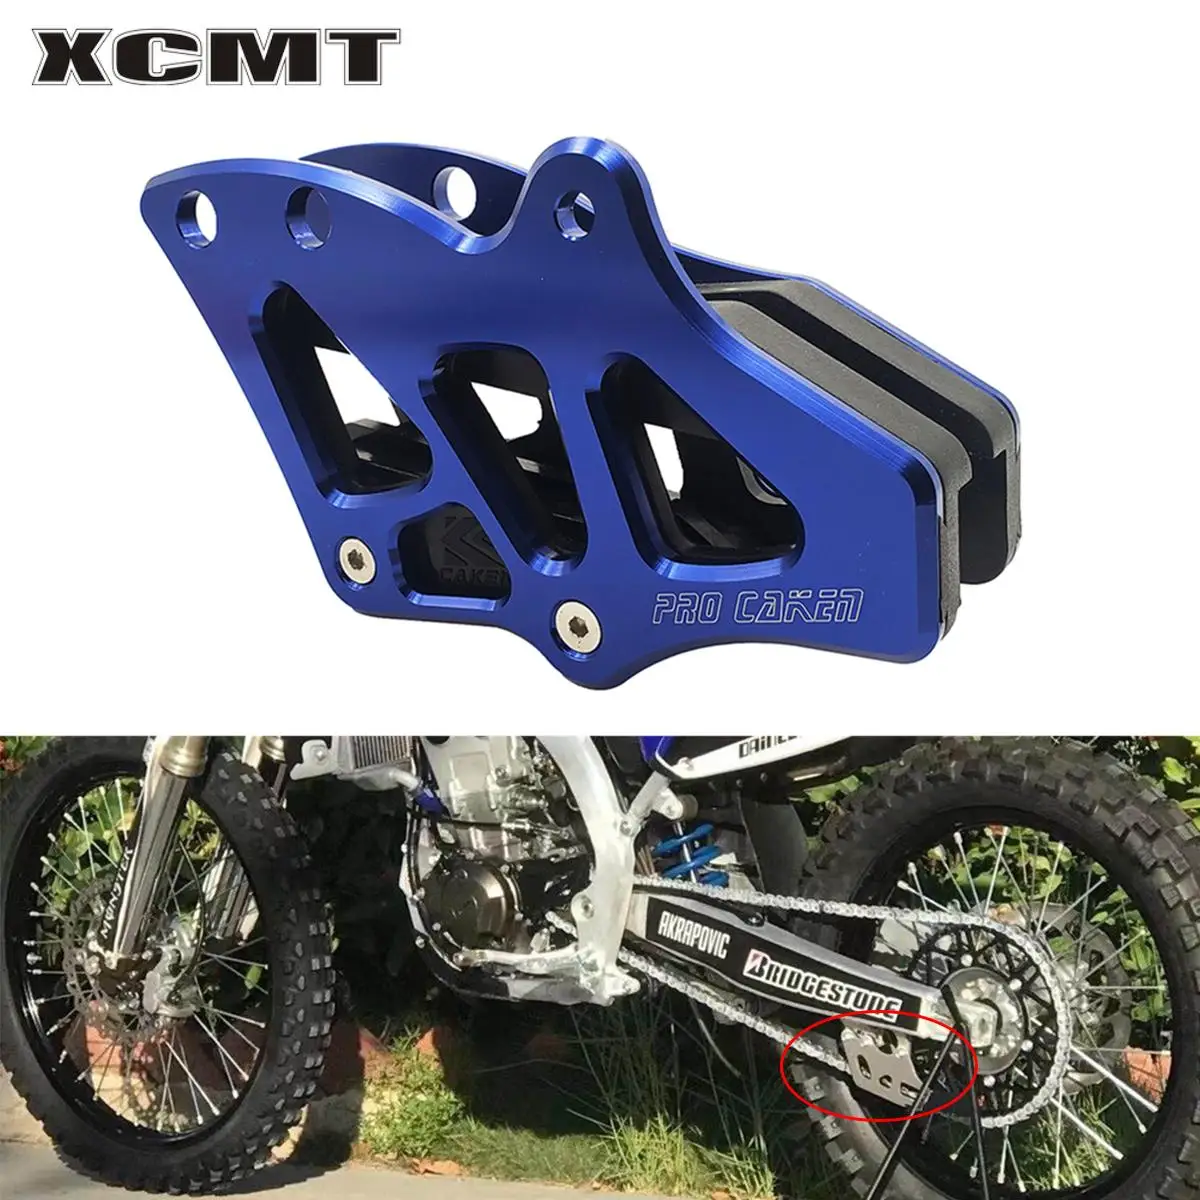 

Motorcycle CNC Sprocket Chain Guide Guard For Yamaha YZ125 YZ250 YZ250F YZ450F YZ125X YZ250X YZ250FX YZ450FX WR250F WR450F 08-20